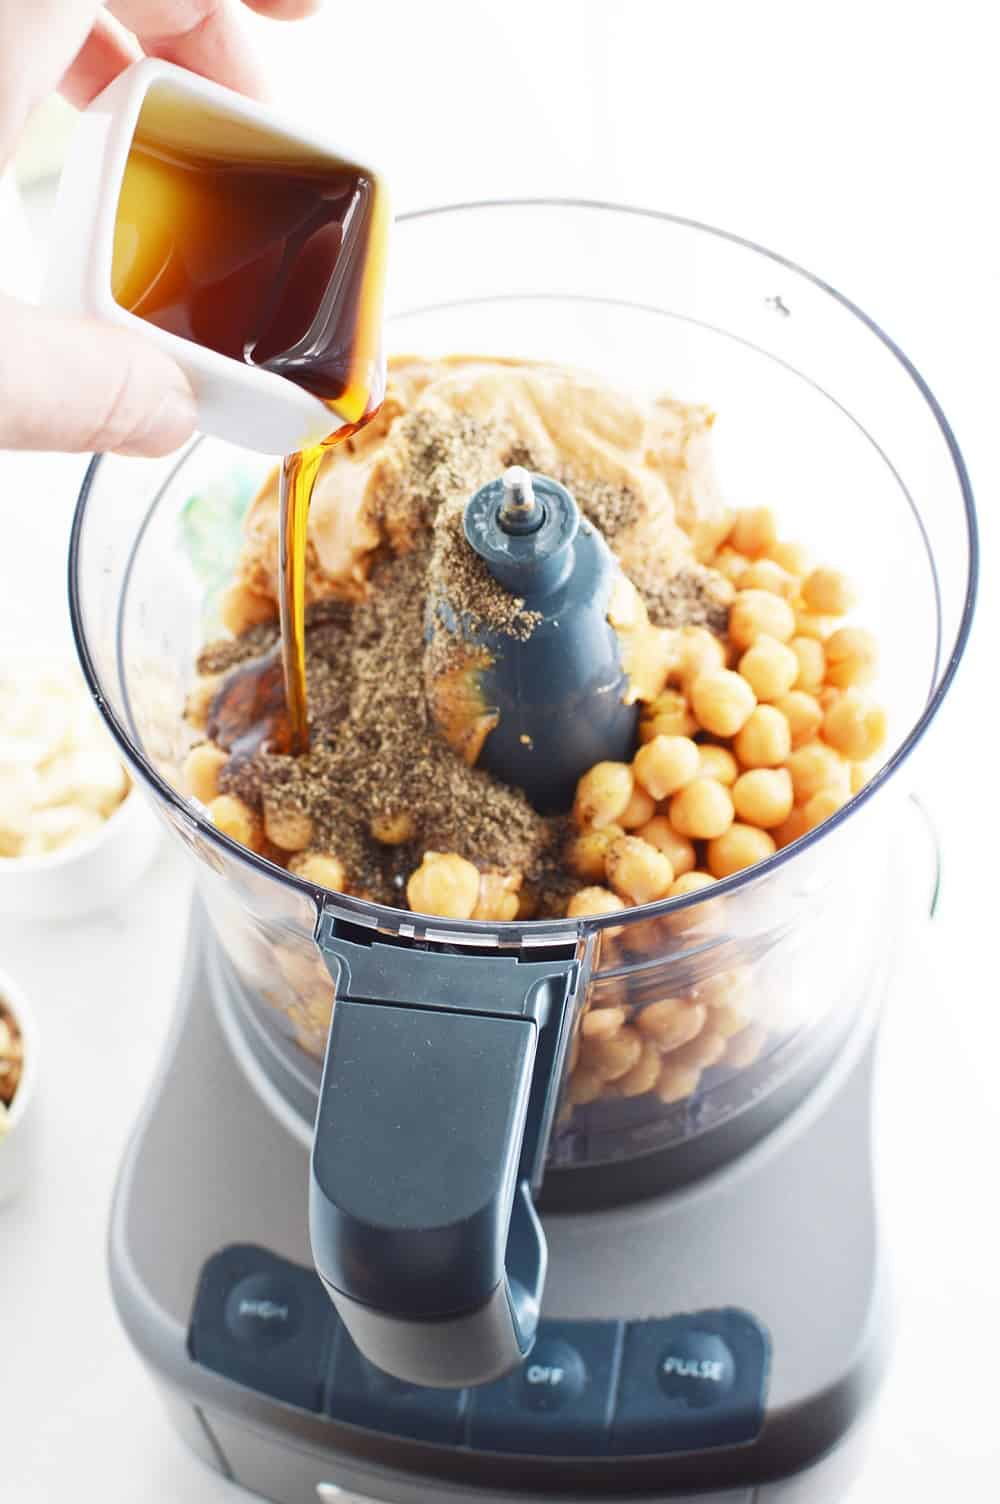 A woman pouring maple syrup into a food processor to make dessert hummus